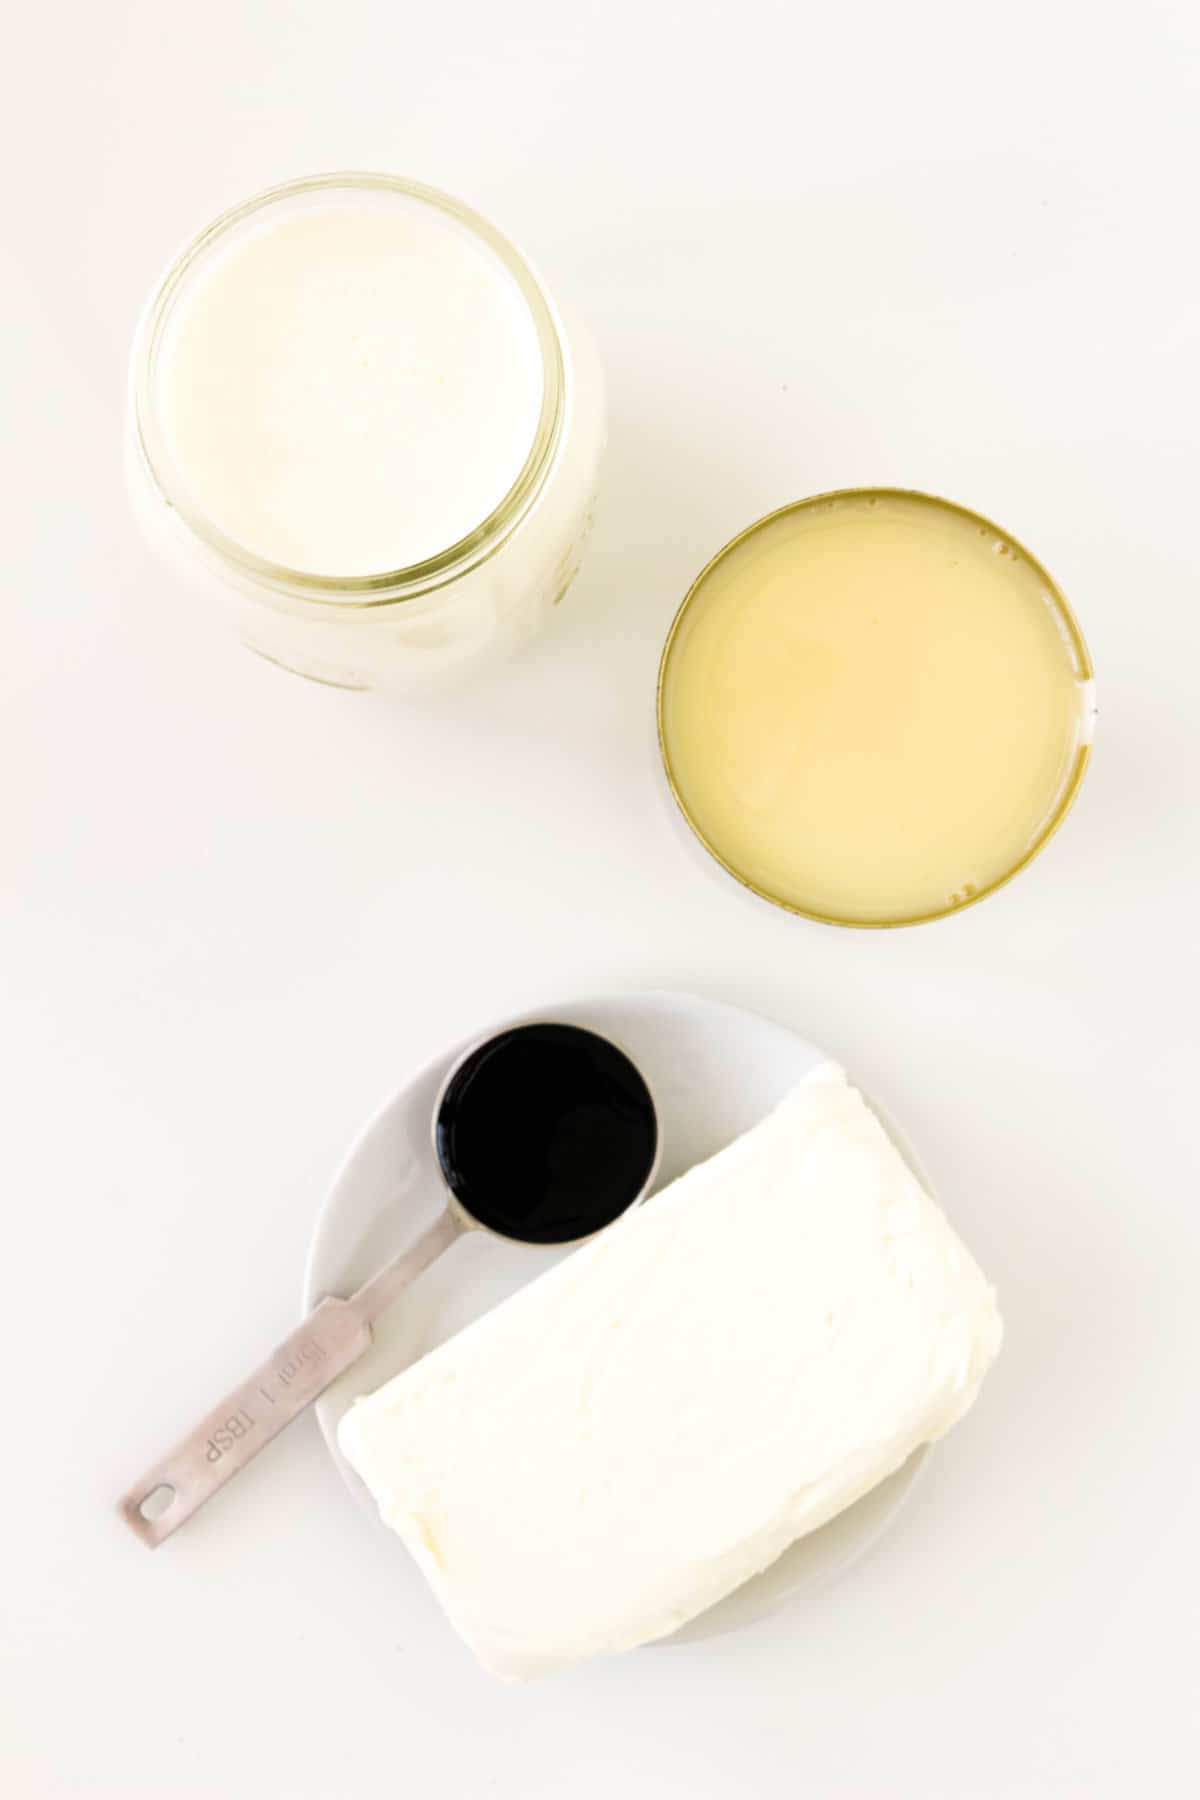 A block of cream cheese, measuring spoon of vanilla bean paste, a can of sweetened condensed milk, and a jar of heavy cream.